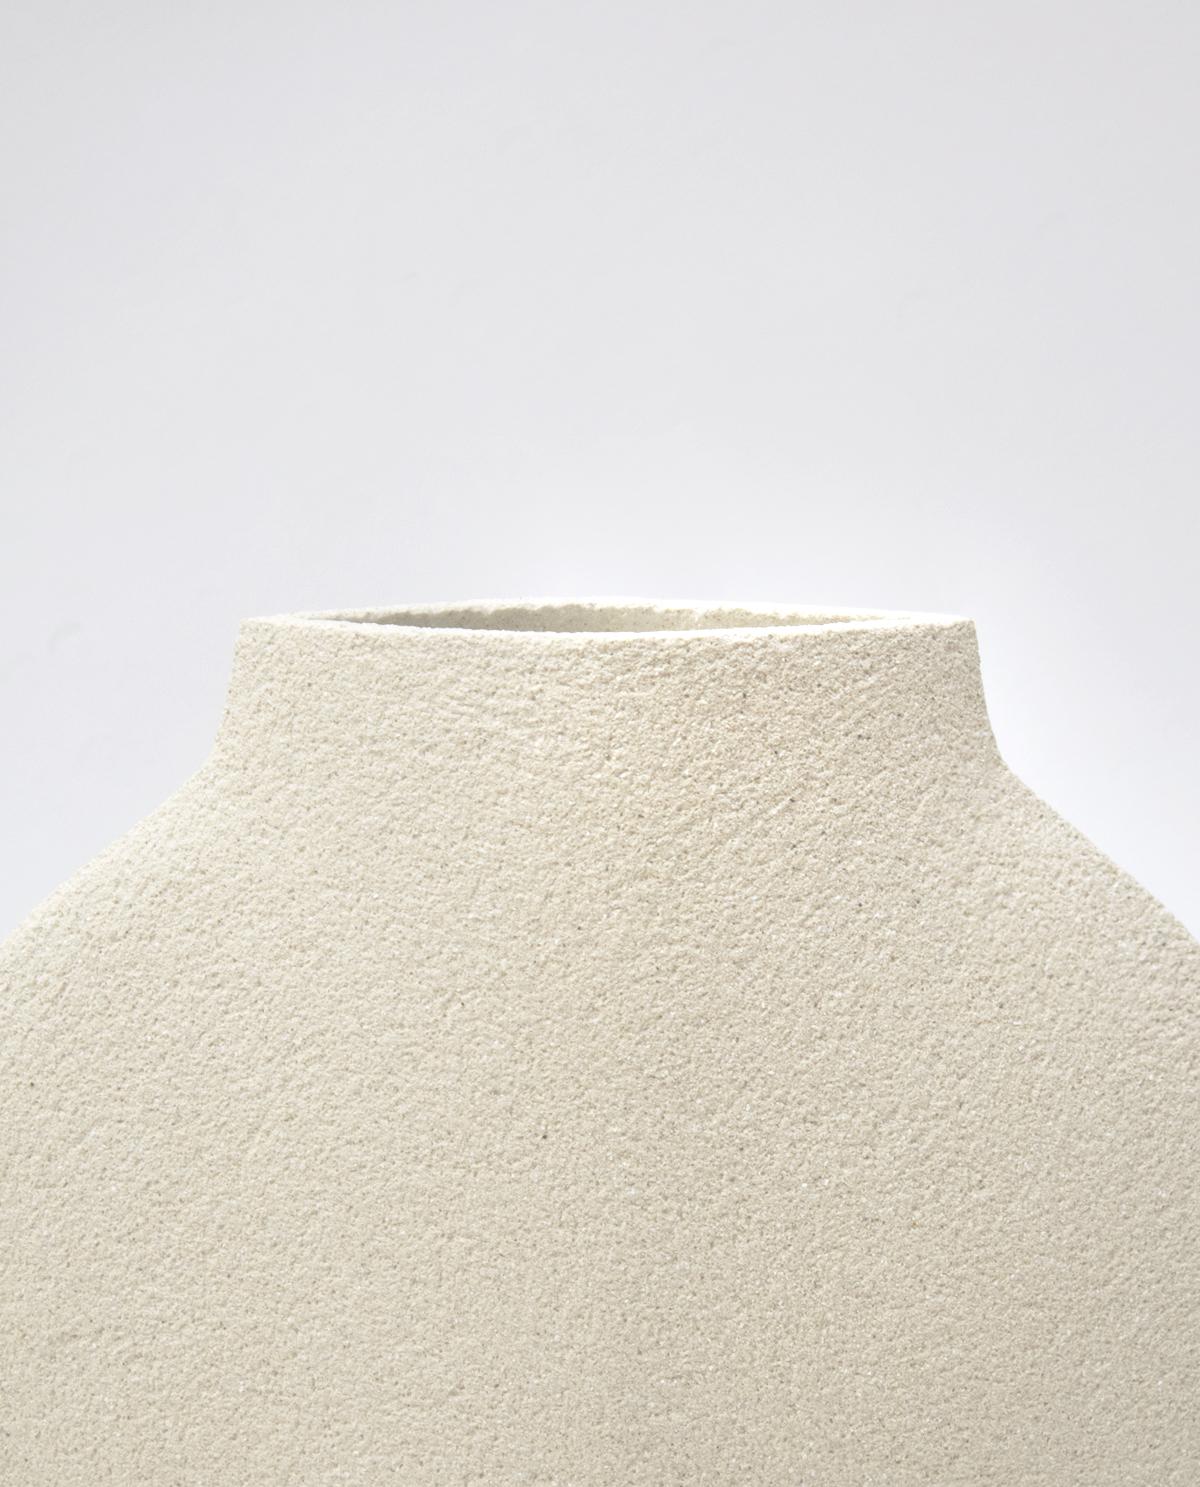 Minimalist 21st Century Dal Vase in White Ceramic, Hand-Crafted in France For Sale